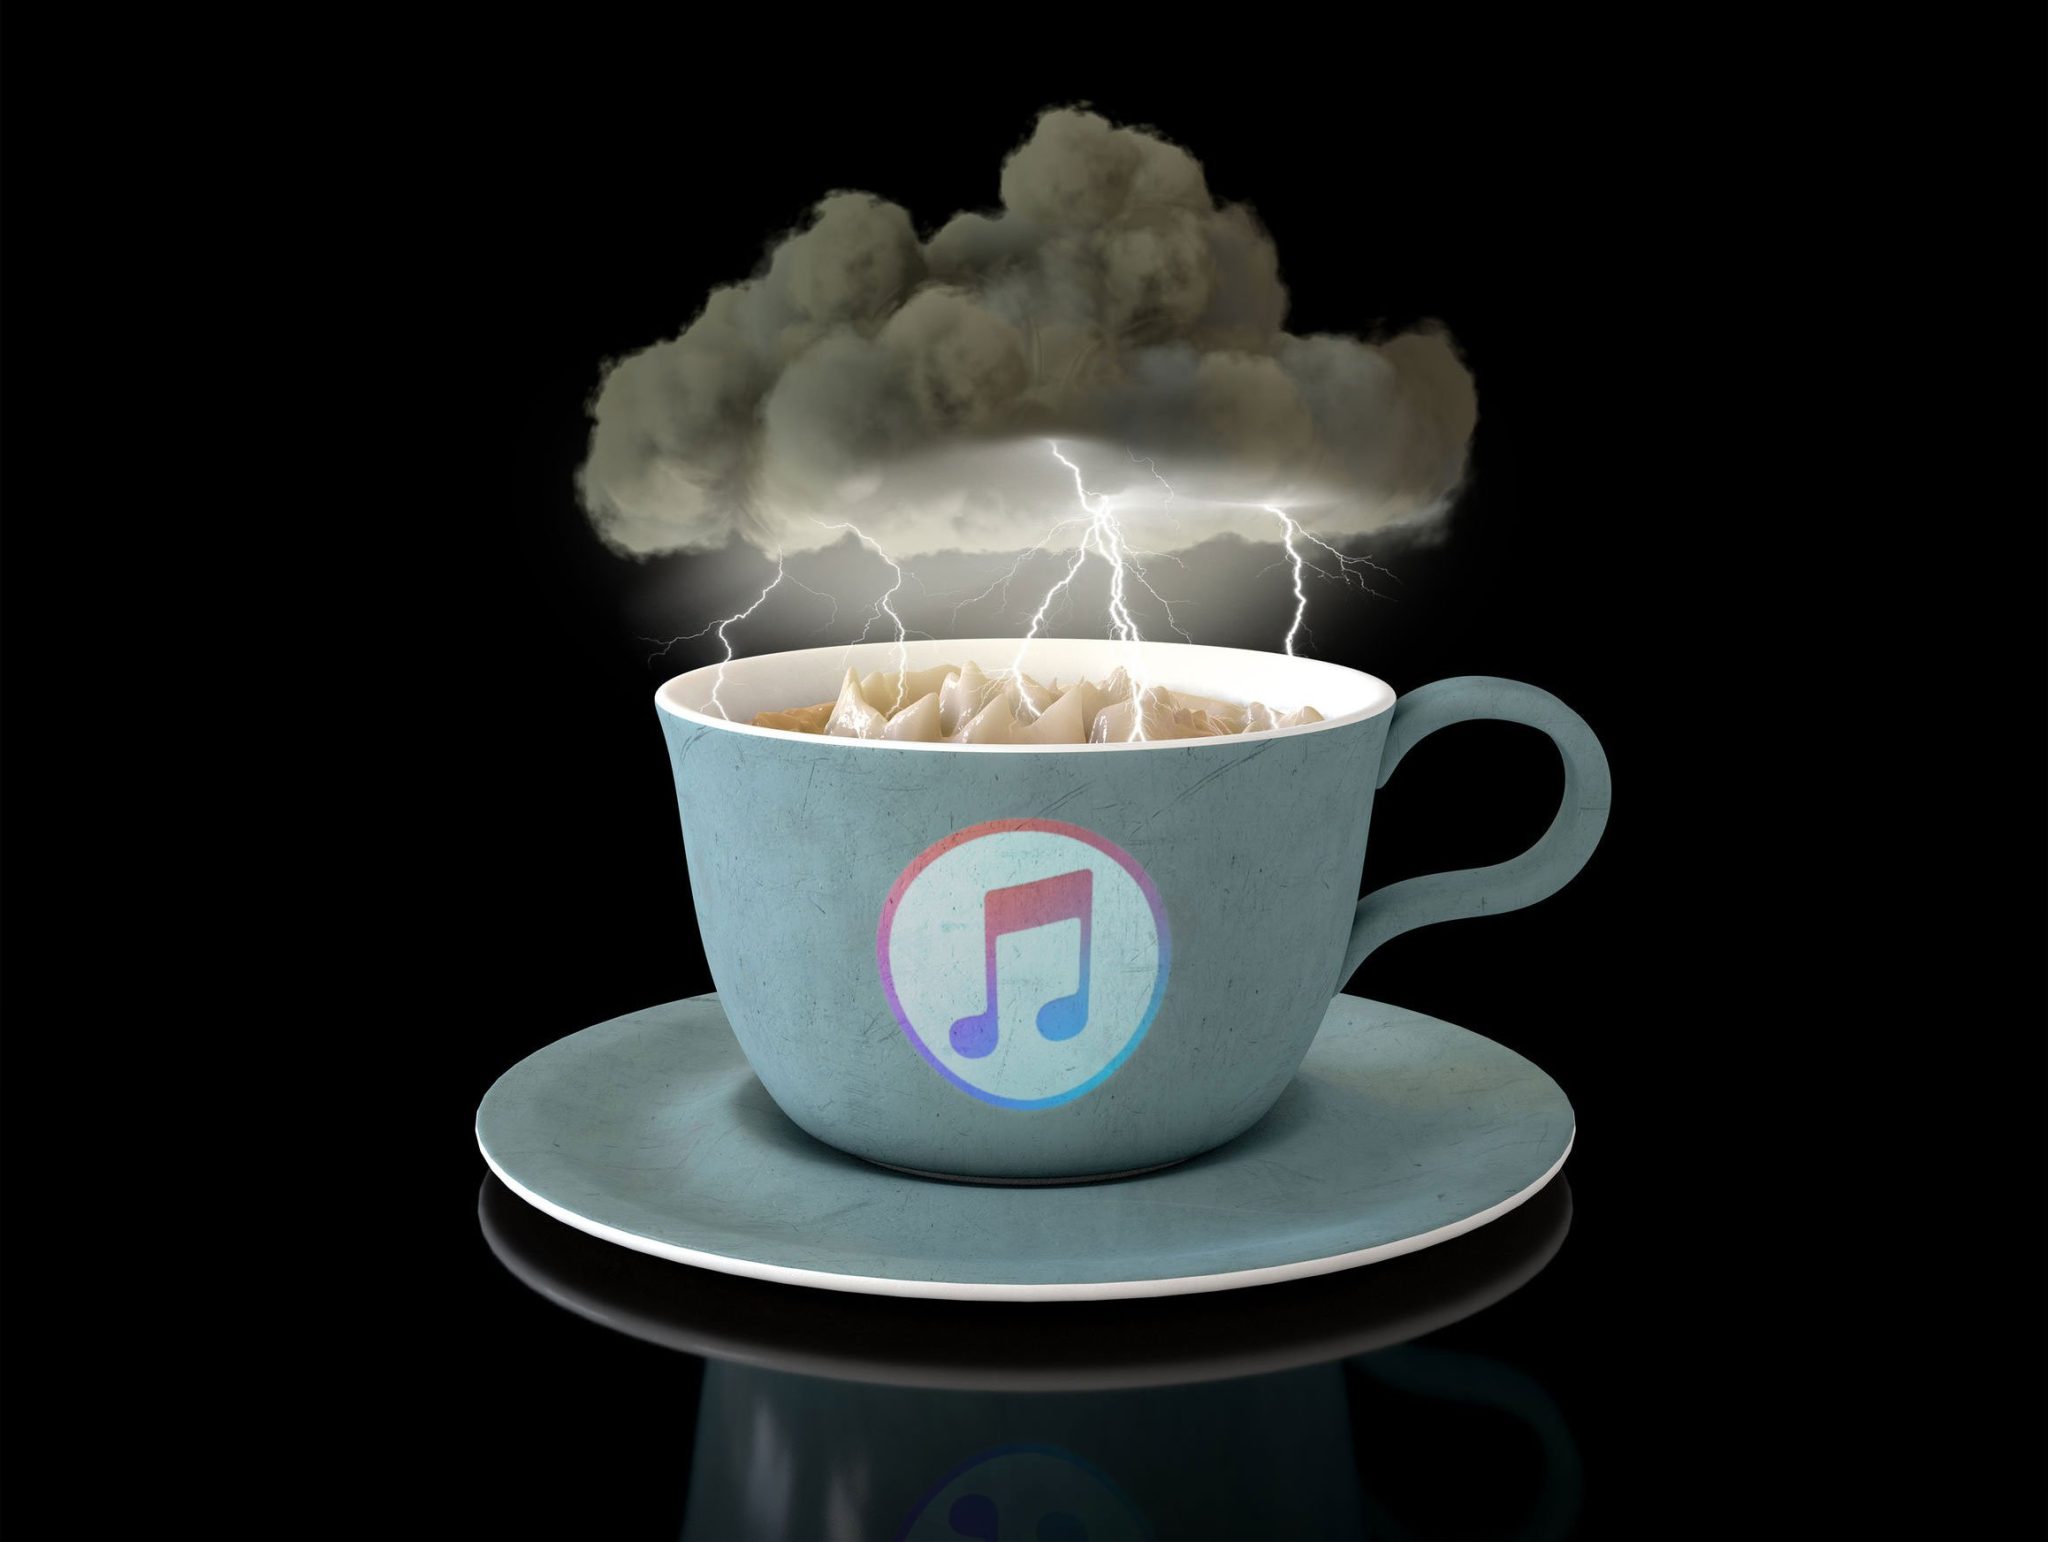 itunes closed dead over storm in a teacup